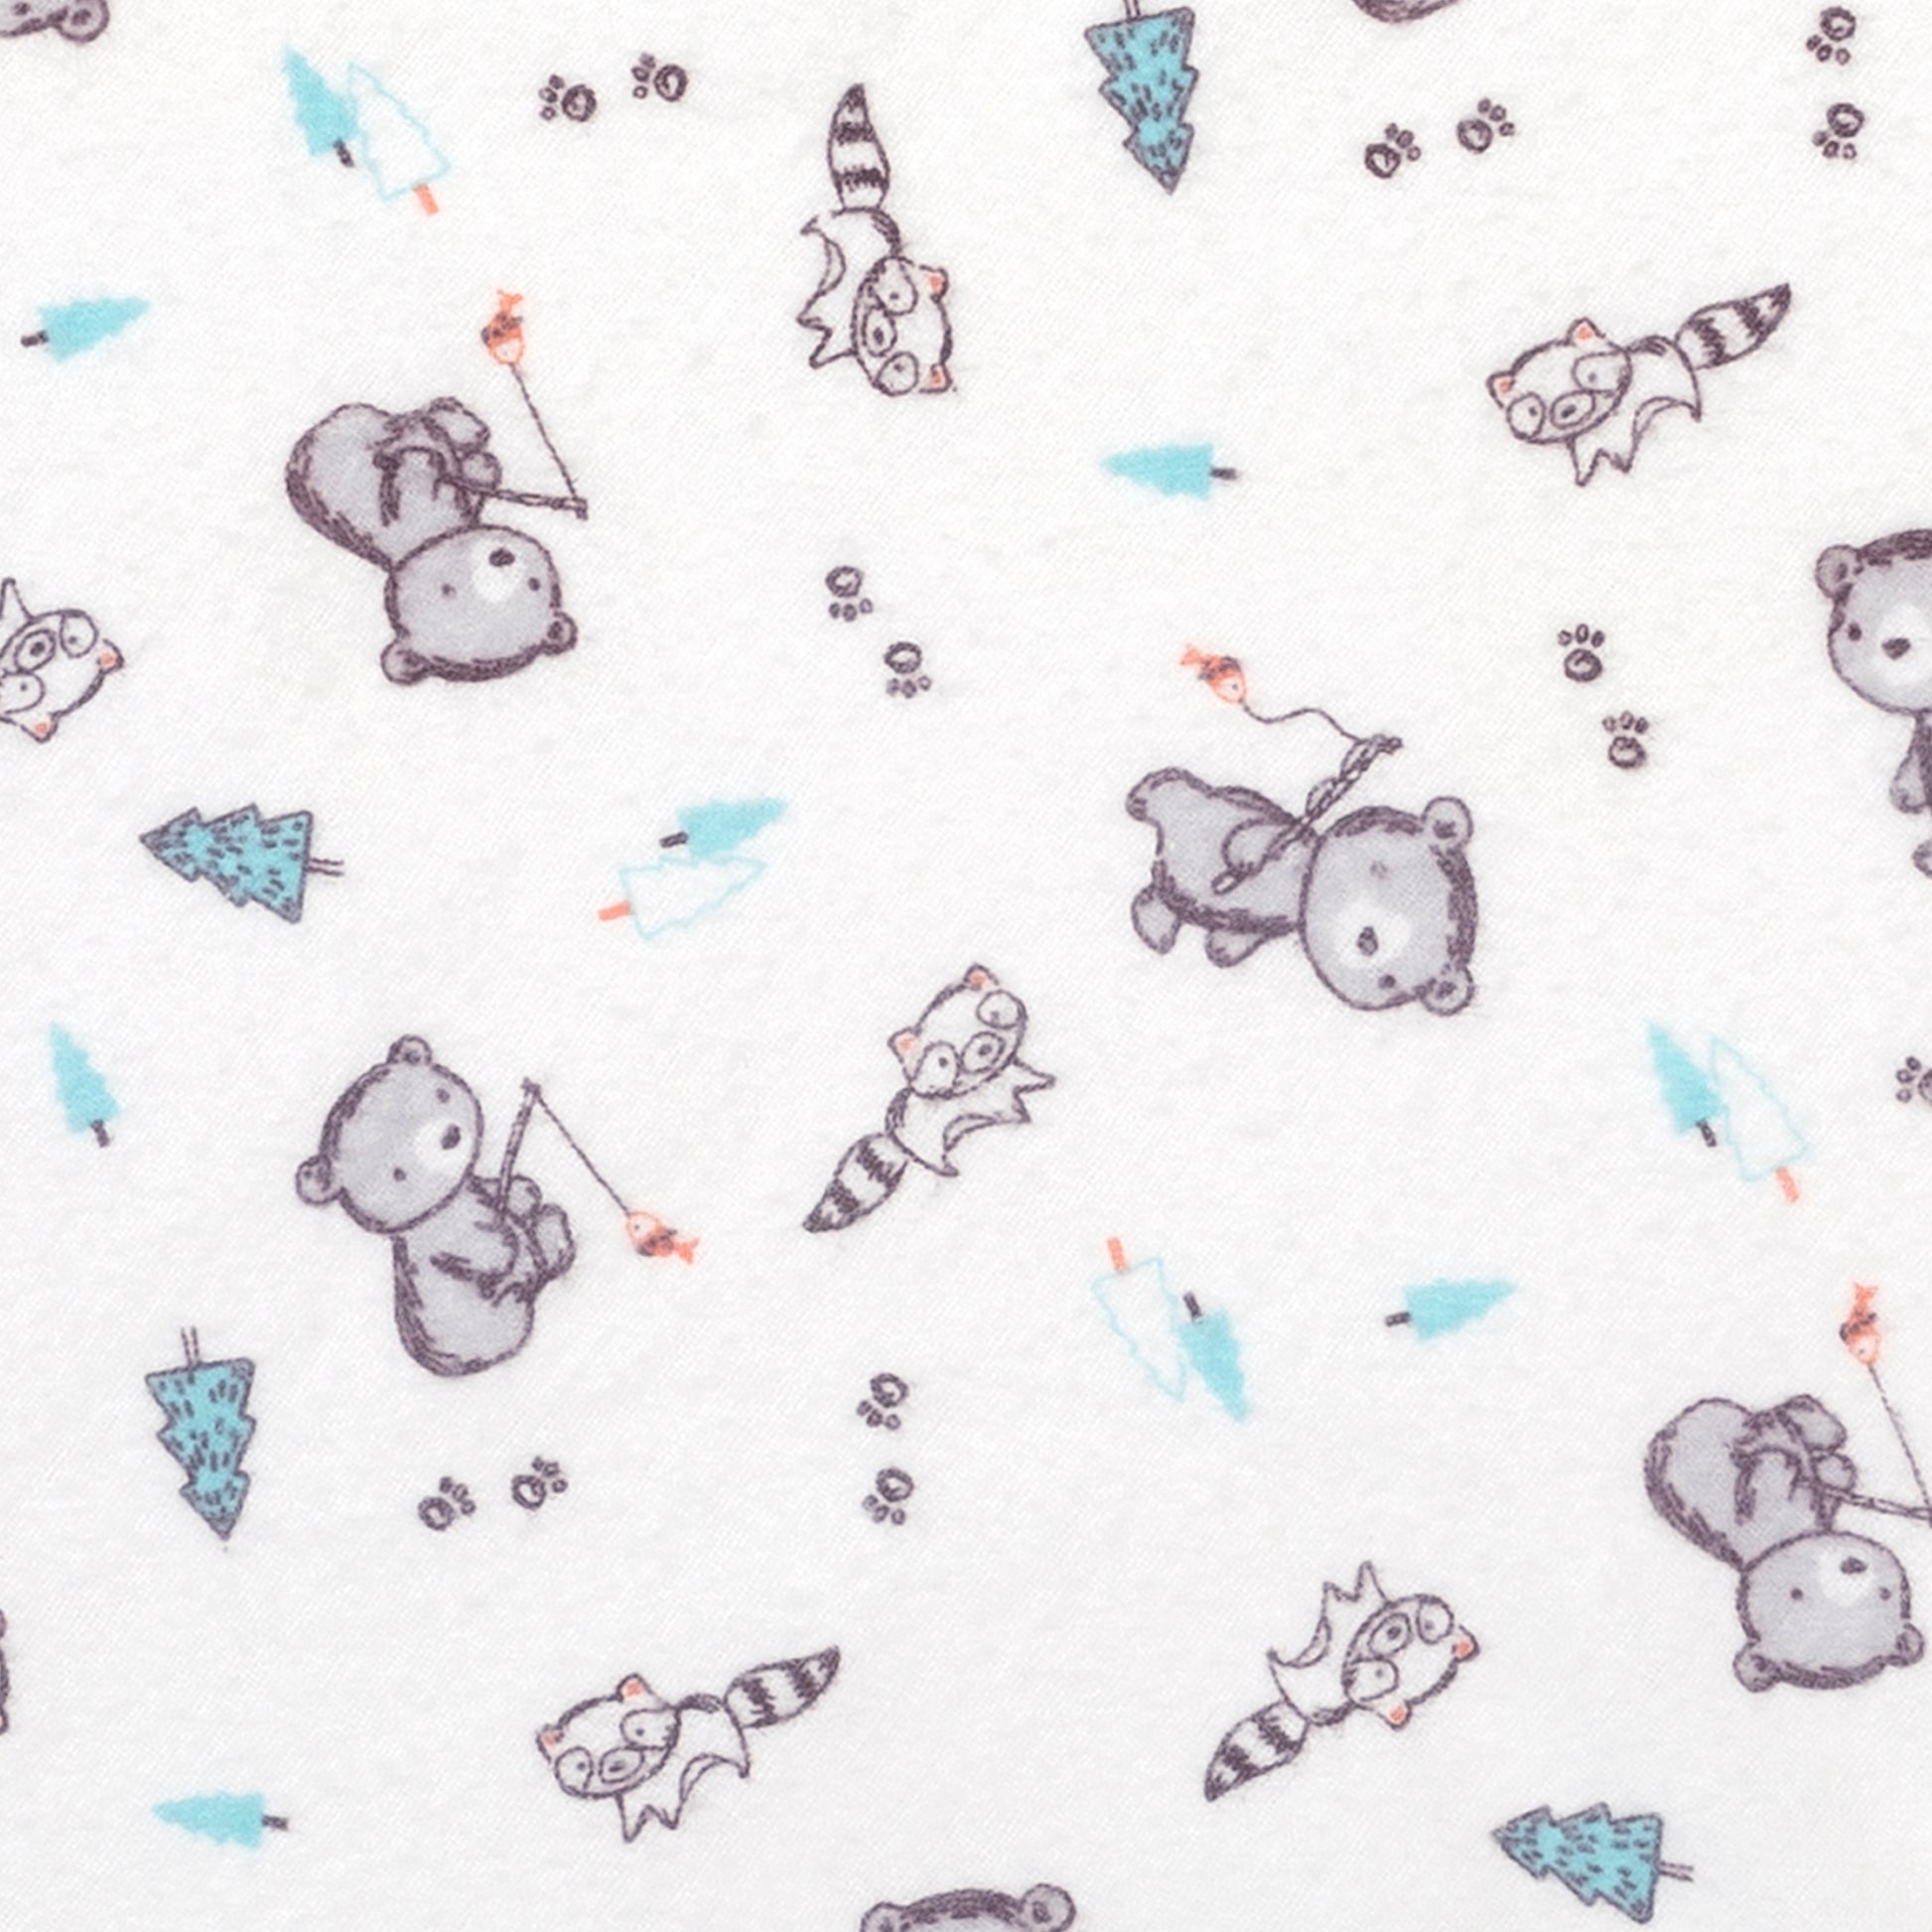  Gone Fishing 3 Piece Crib Bedding Set; swatch view features adorable fishing bears with raccoons and forest trees